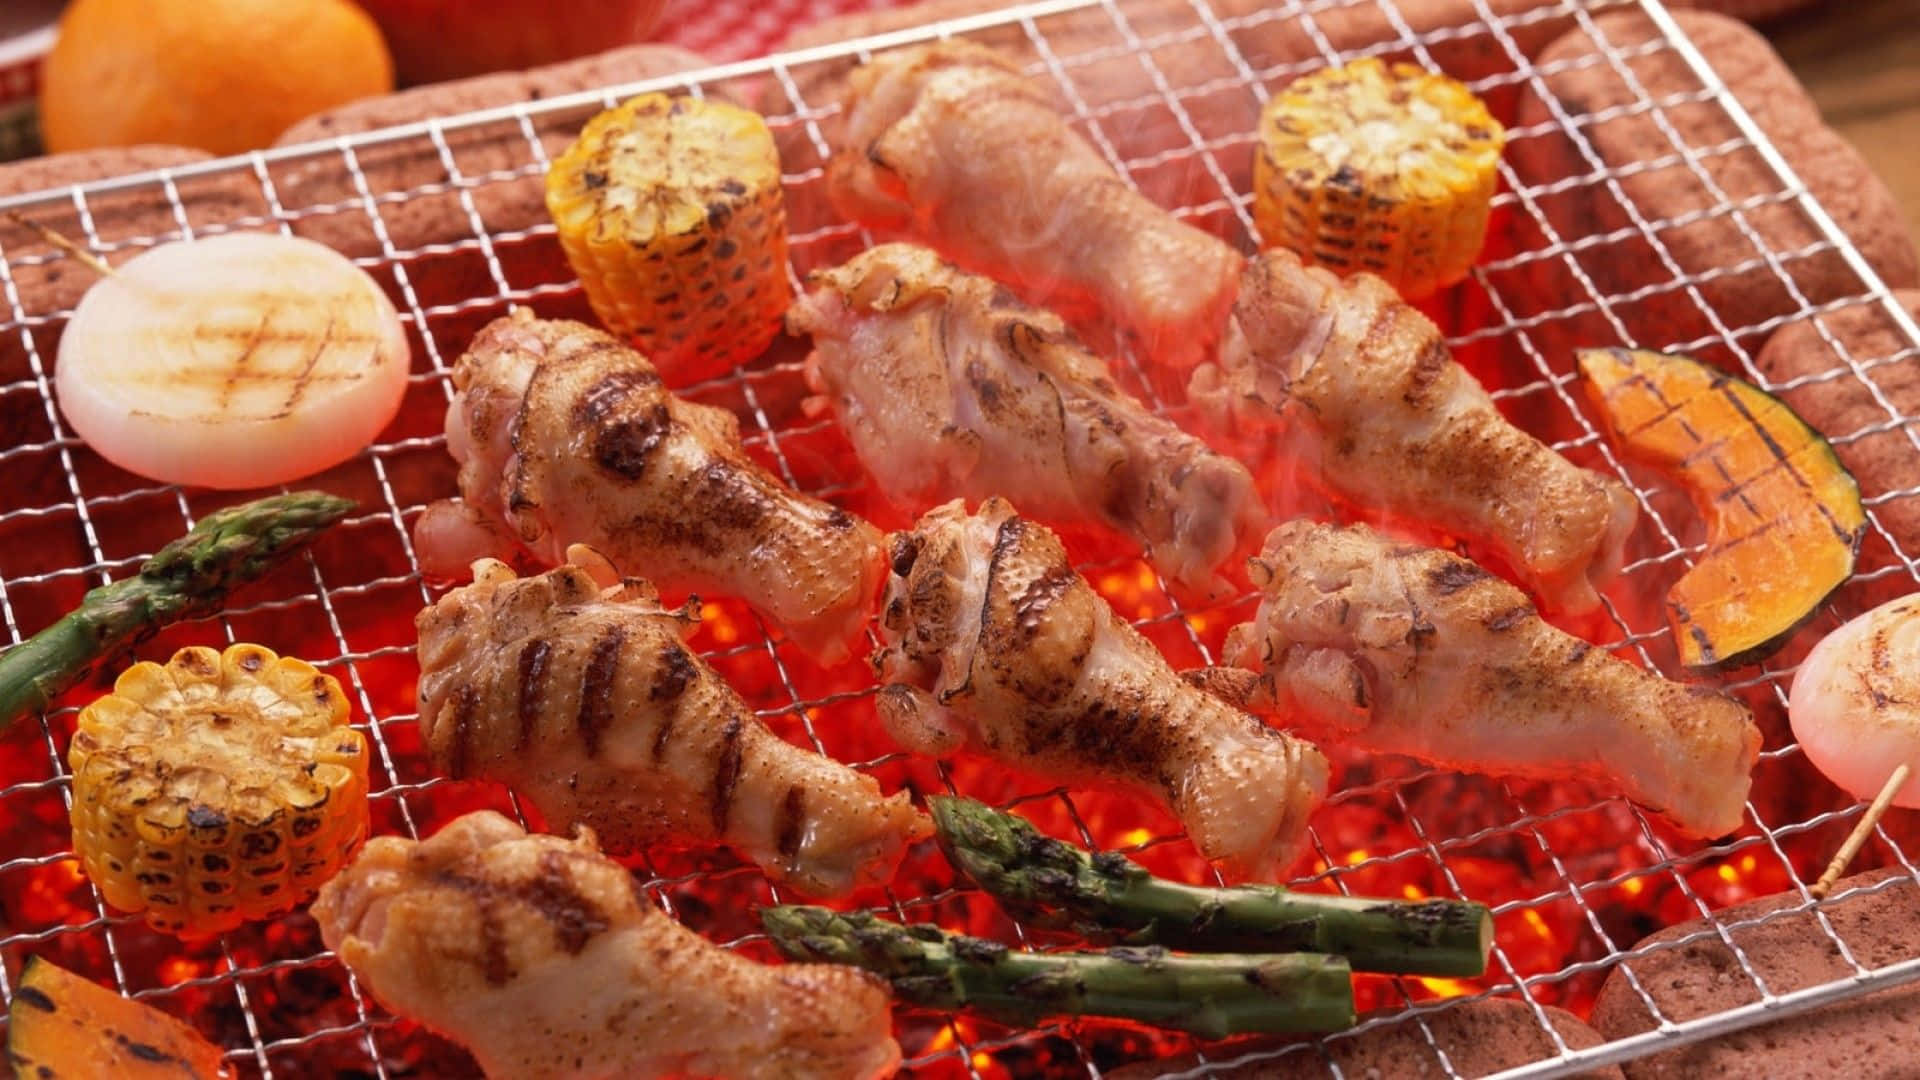 Get that summer feeling with a sizzling BBQ